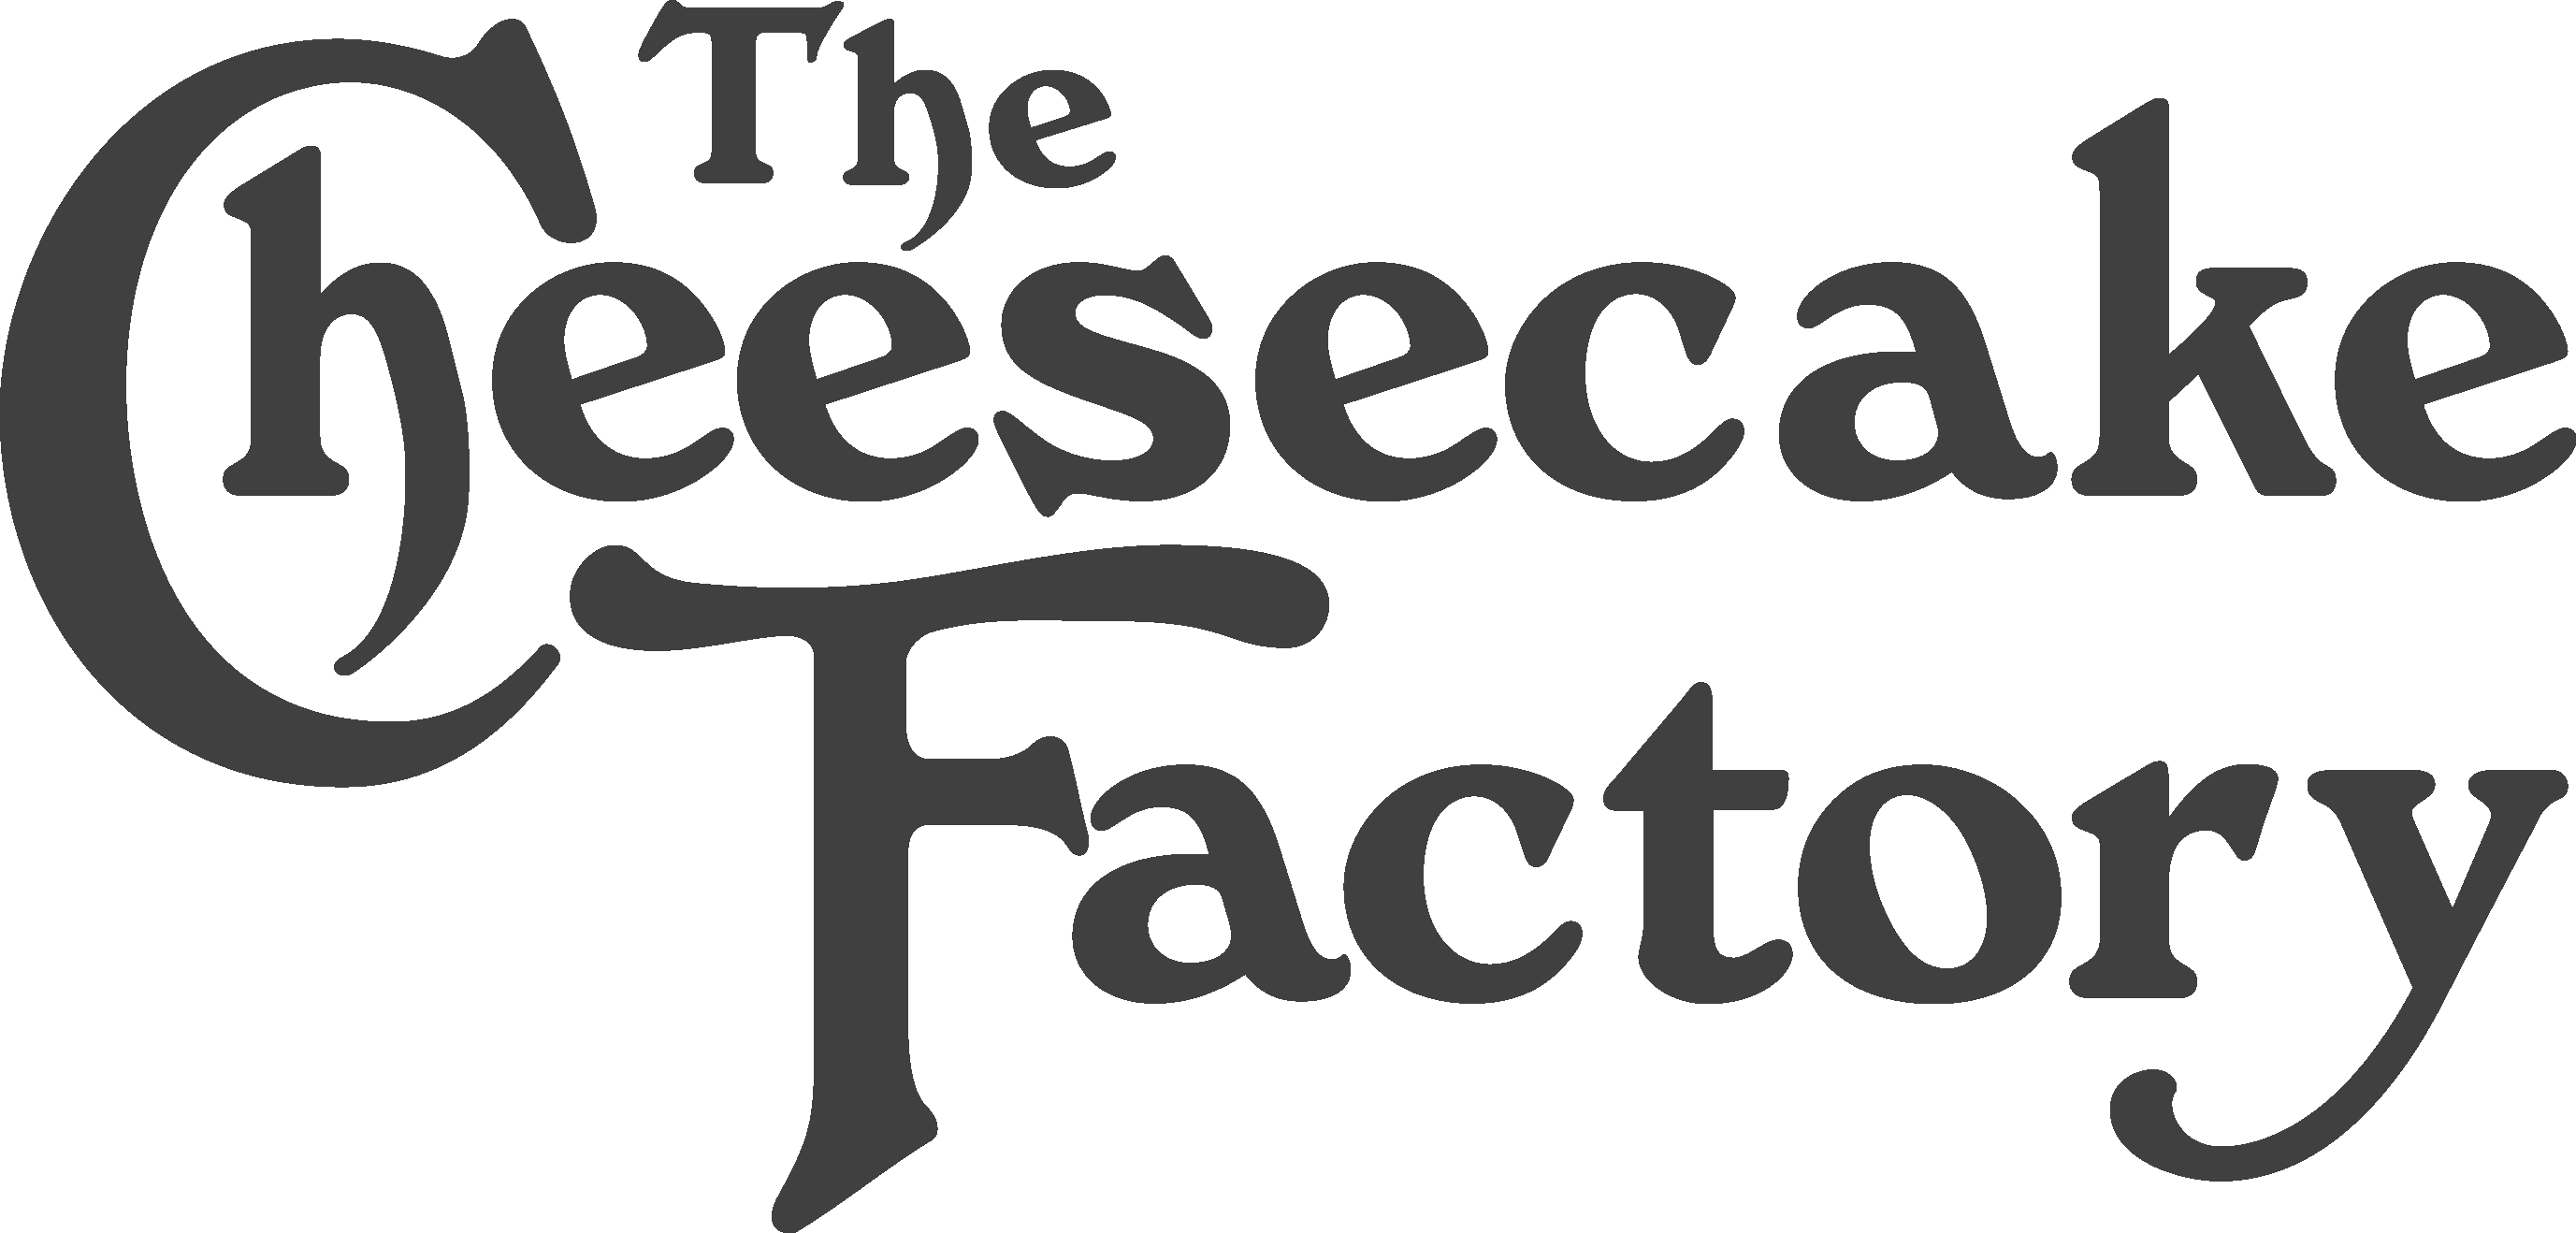 Cheesecake Factory Logo png